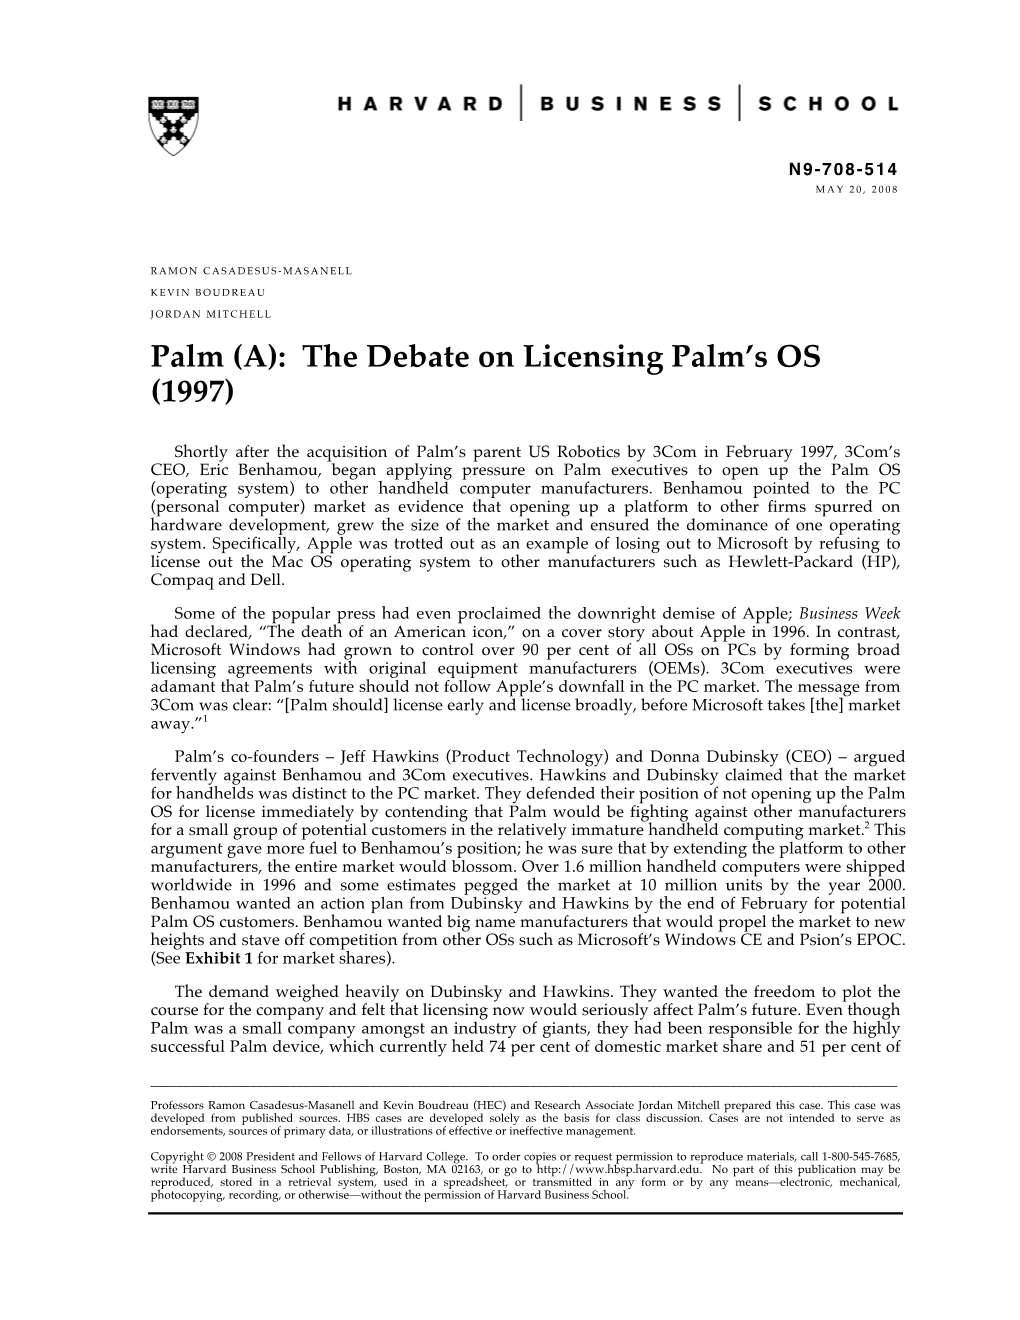 Palm (A): the Debate on Licensing Palm's OS (1997)